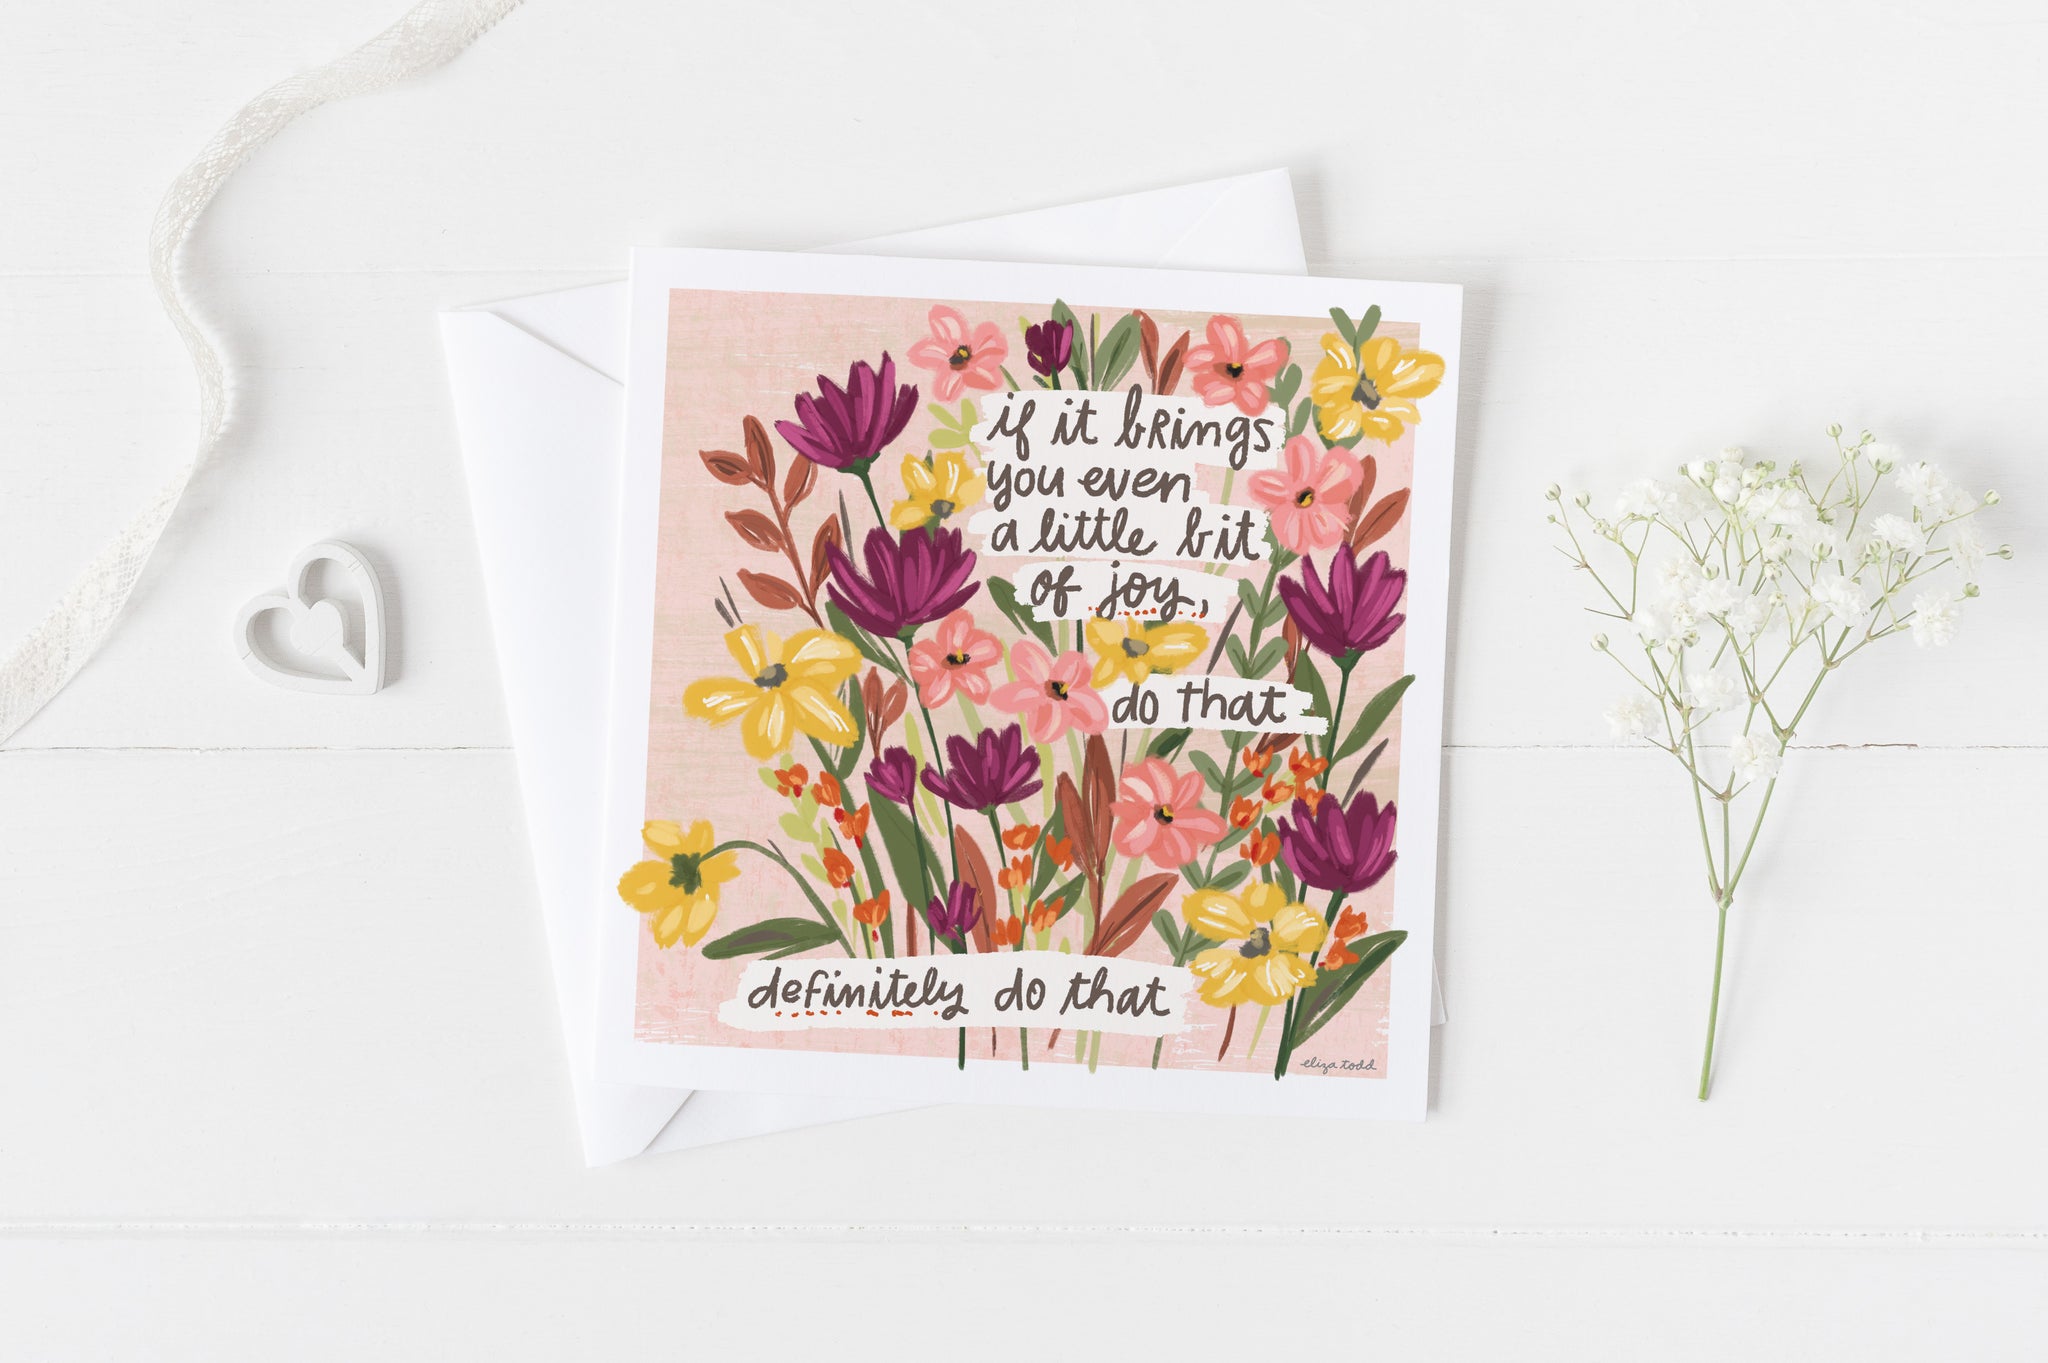 5x5 greeting card by Eliza Todd featuring beautiful flowers, saying "If it brings you even a little bit of joy, do that. Definitely do that." - APeaceofWerk.com